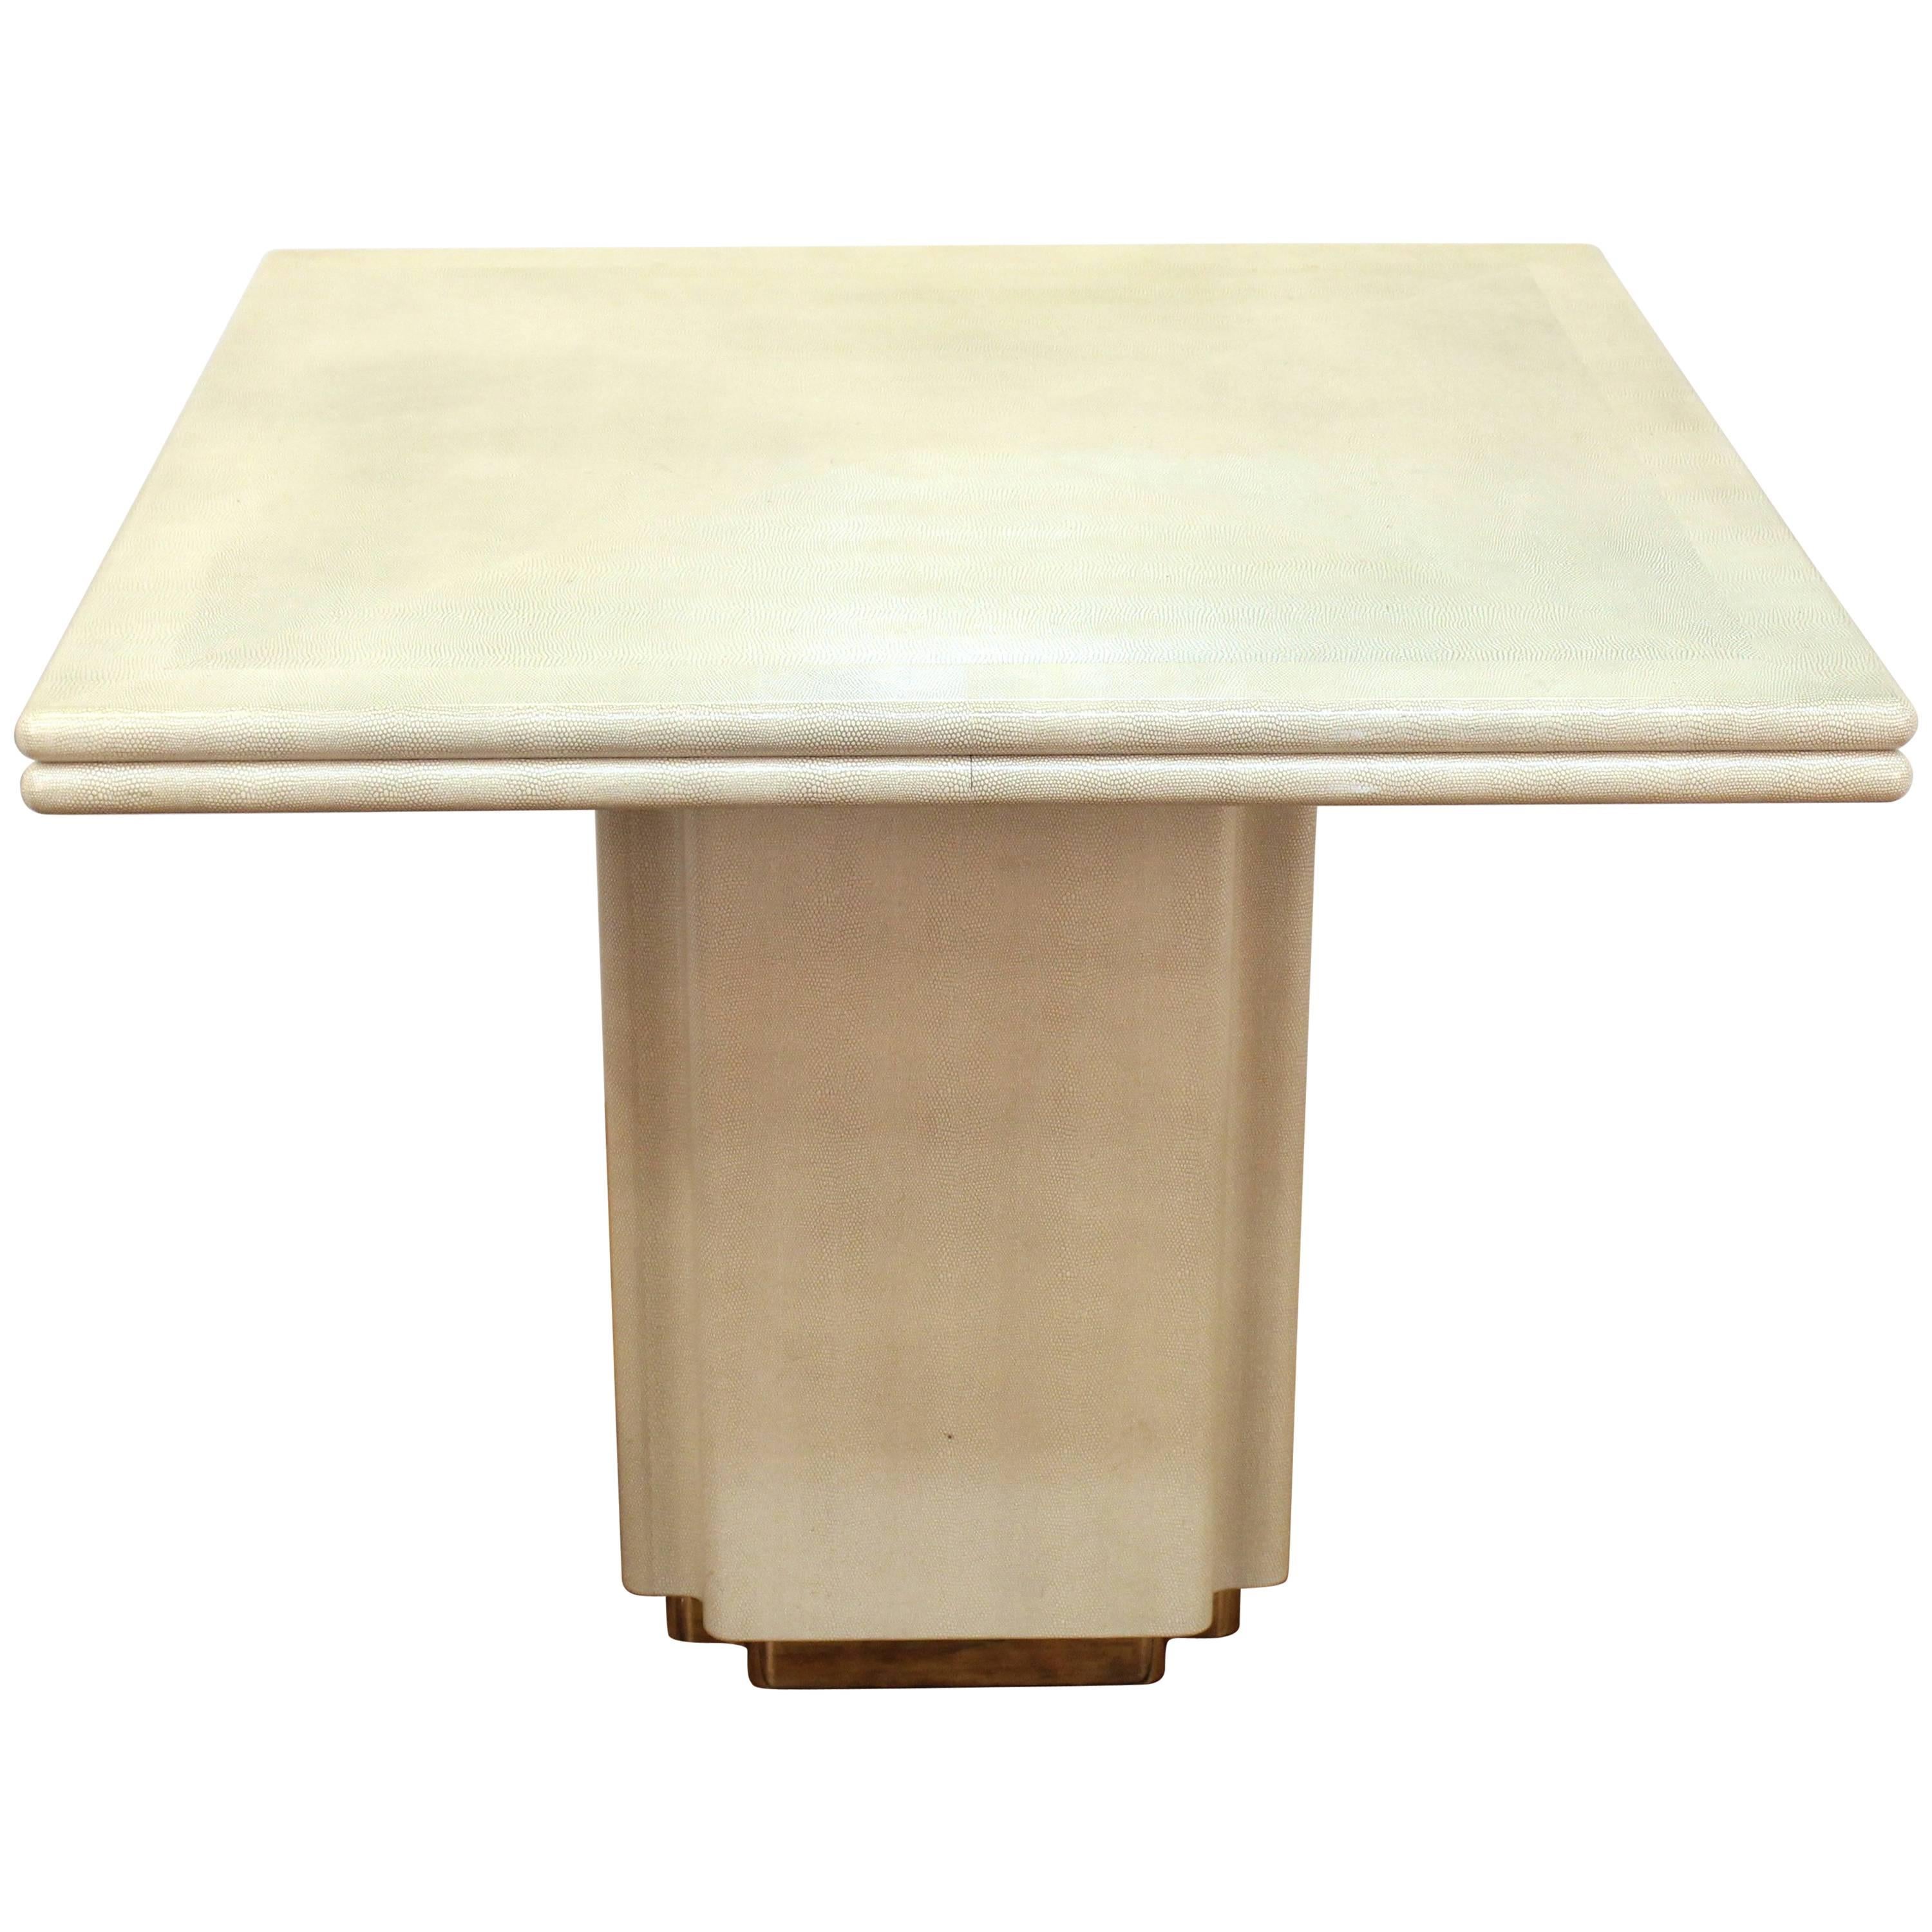 Modernist Shagreen Square Coffee Table